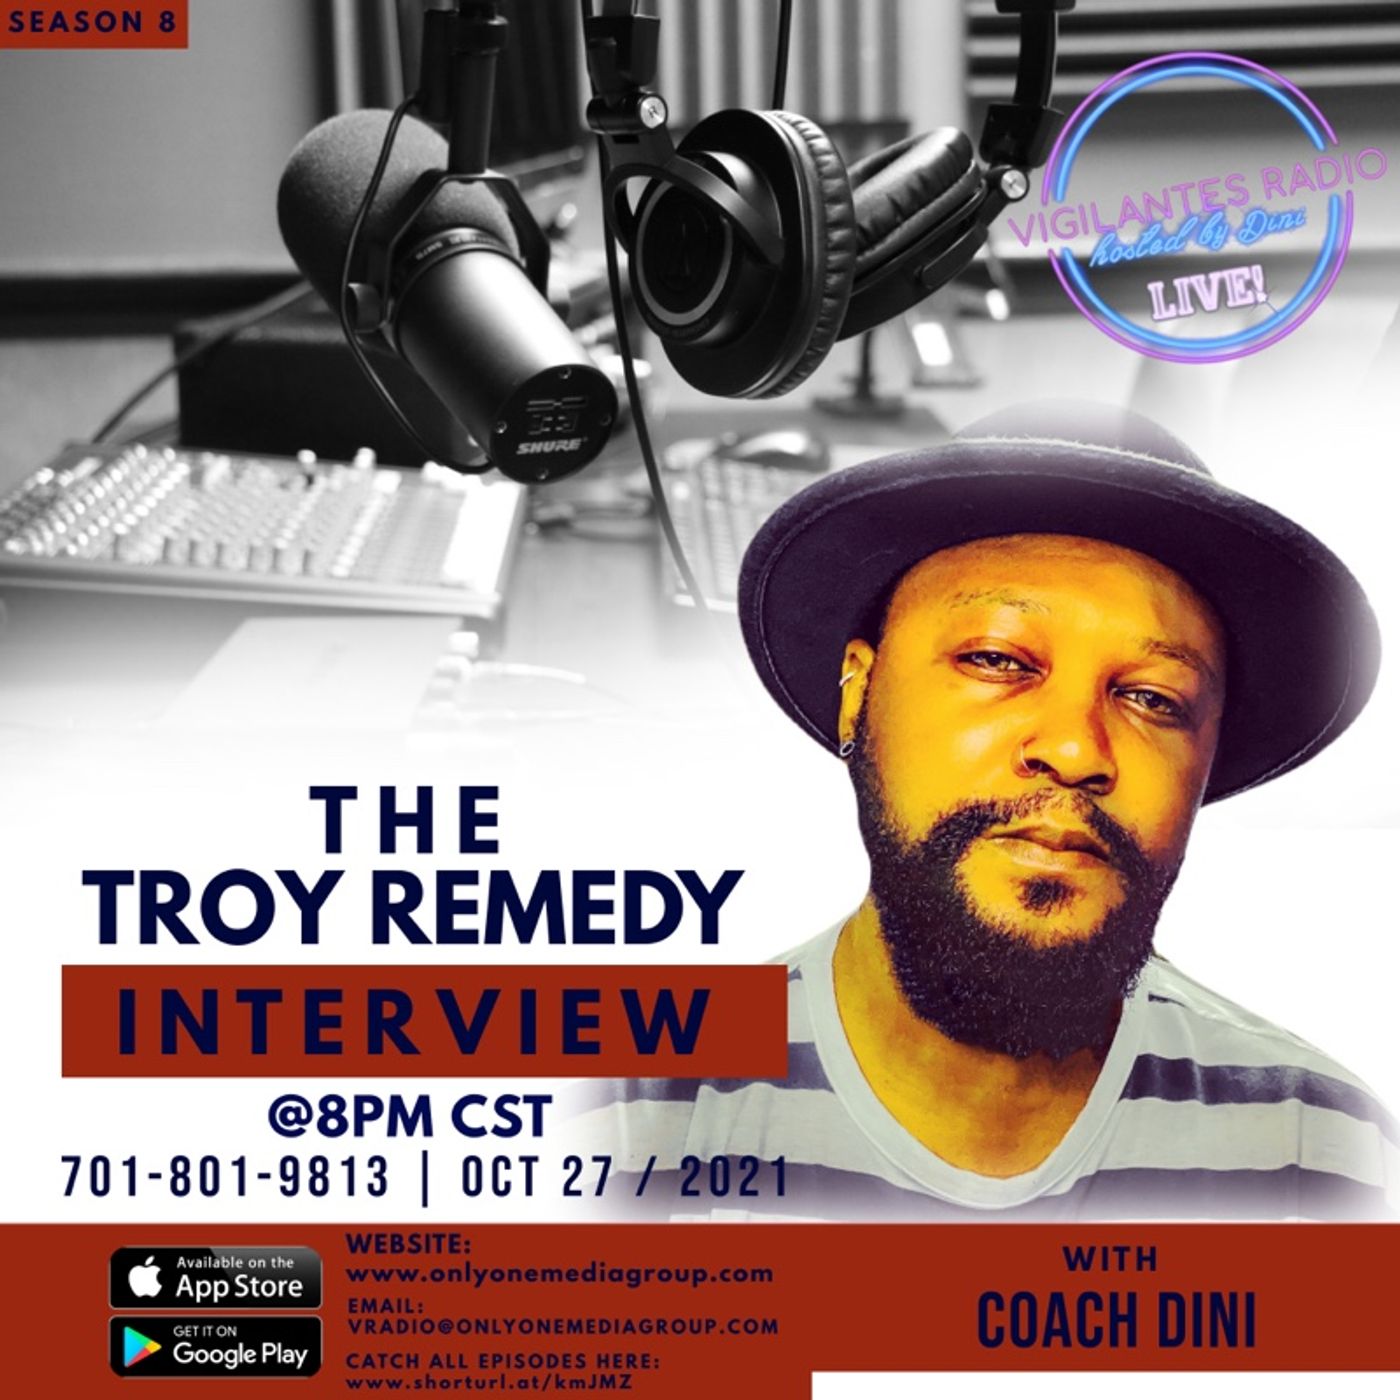 The Troy Remedy Interview IV. Image